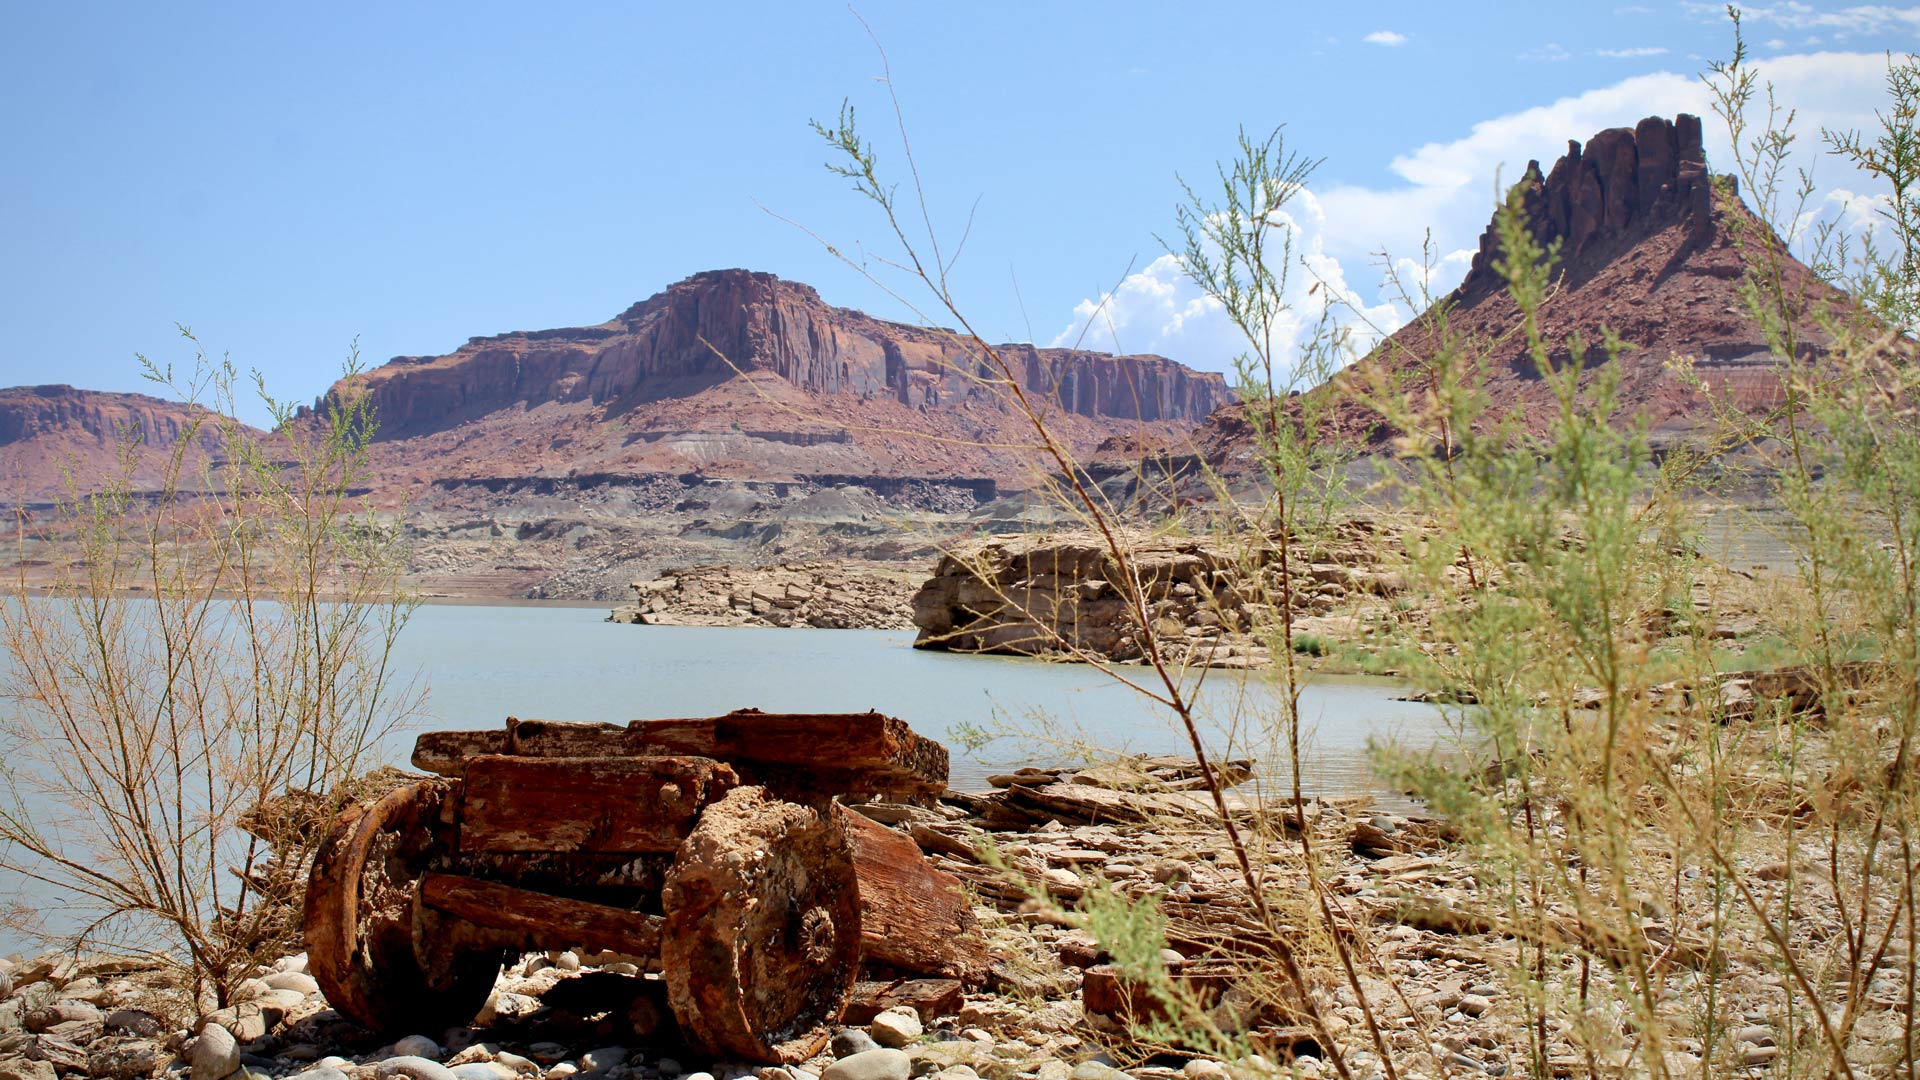 ‘It’s getting close’: As the megadrought grinds on, Arizona working to meet water demands